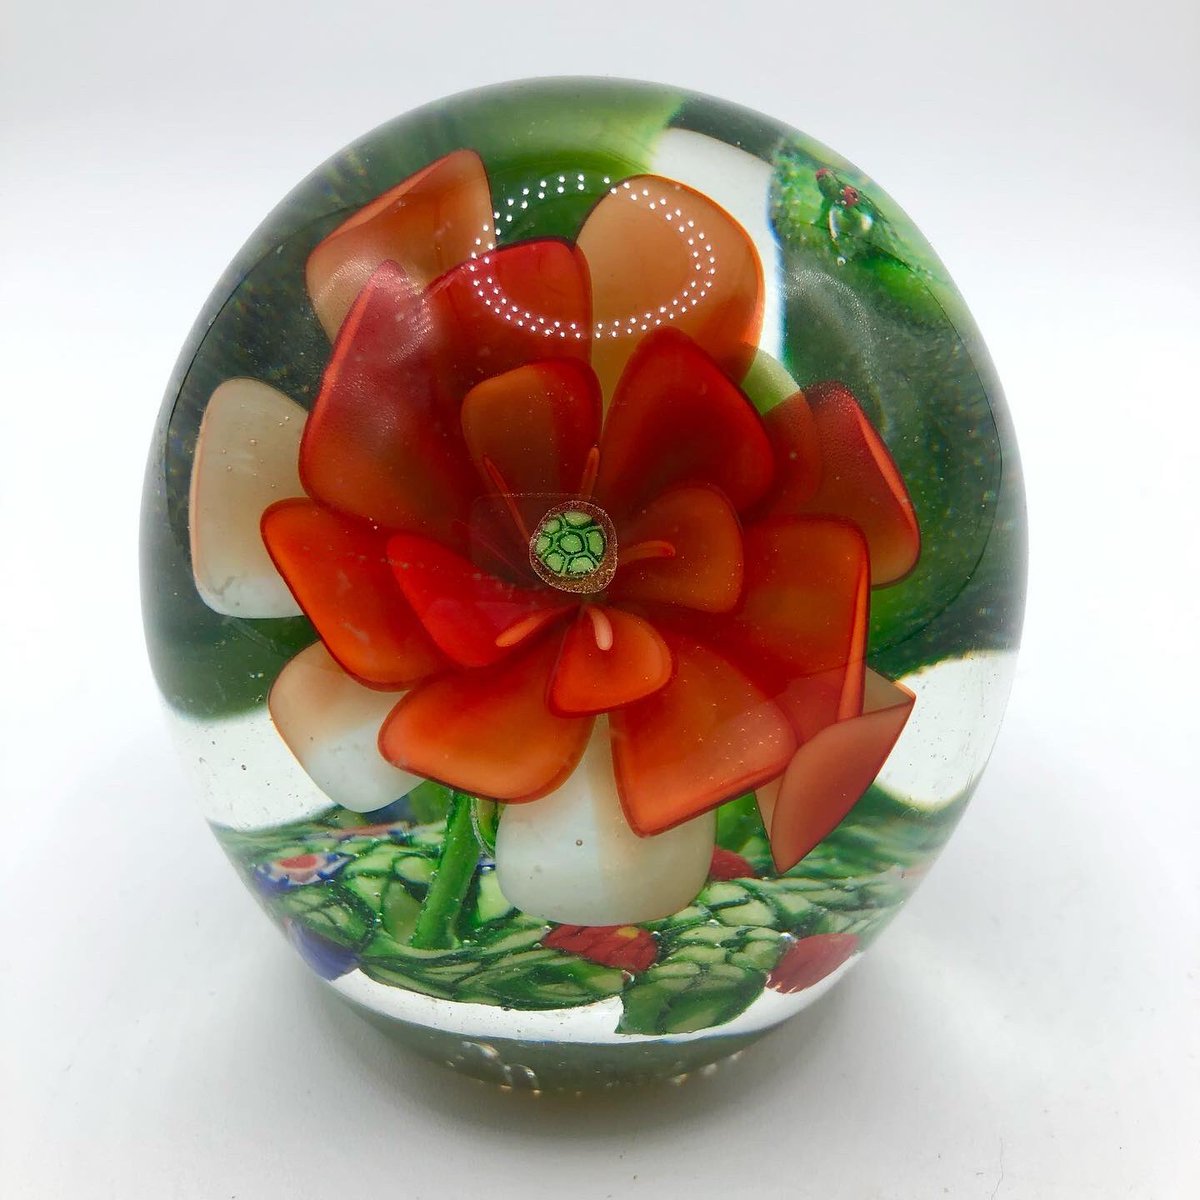 This lovely murano style paperweight is pretty and purposeful 🥰 it’s available on @Etsy at BeezyAndCo - link in bio #vintage #etsy #paperweight #flower #homedecor #officedesign #glass #vintagestyle #gift #giftforboss #BossLady #Mondayvibes #homeoffice #mondaythoughts #etsyfinds